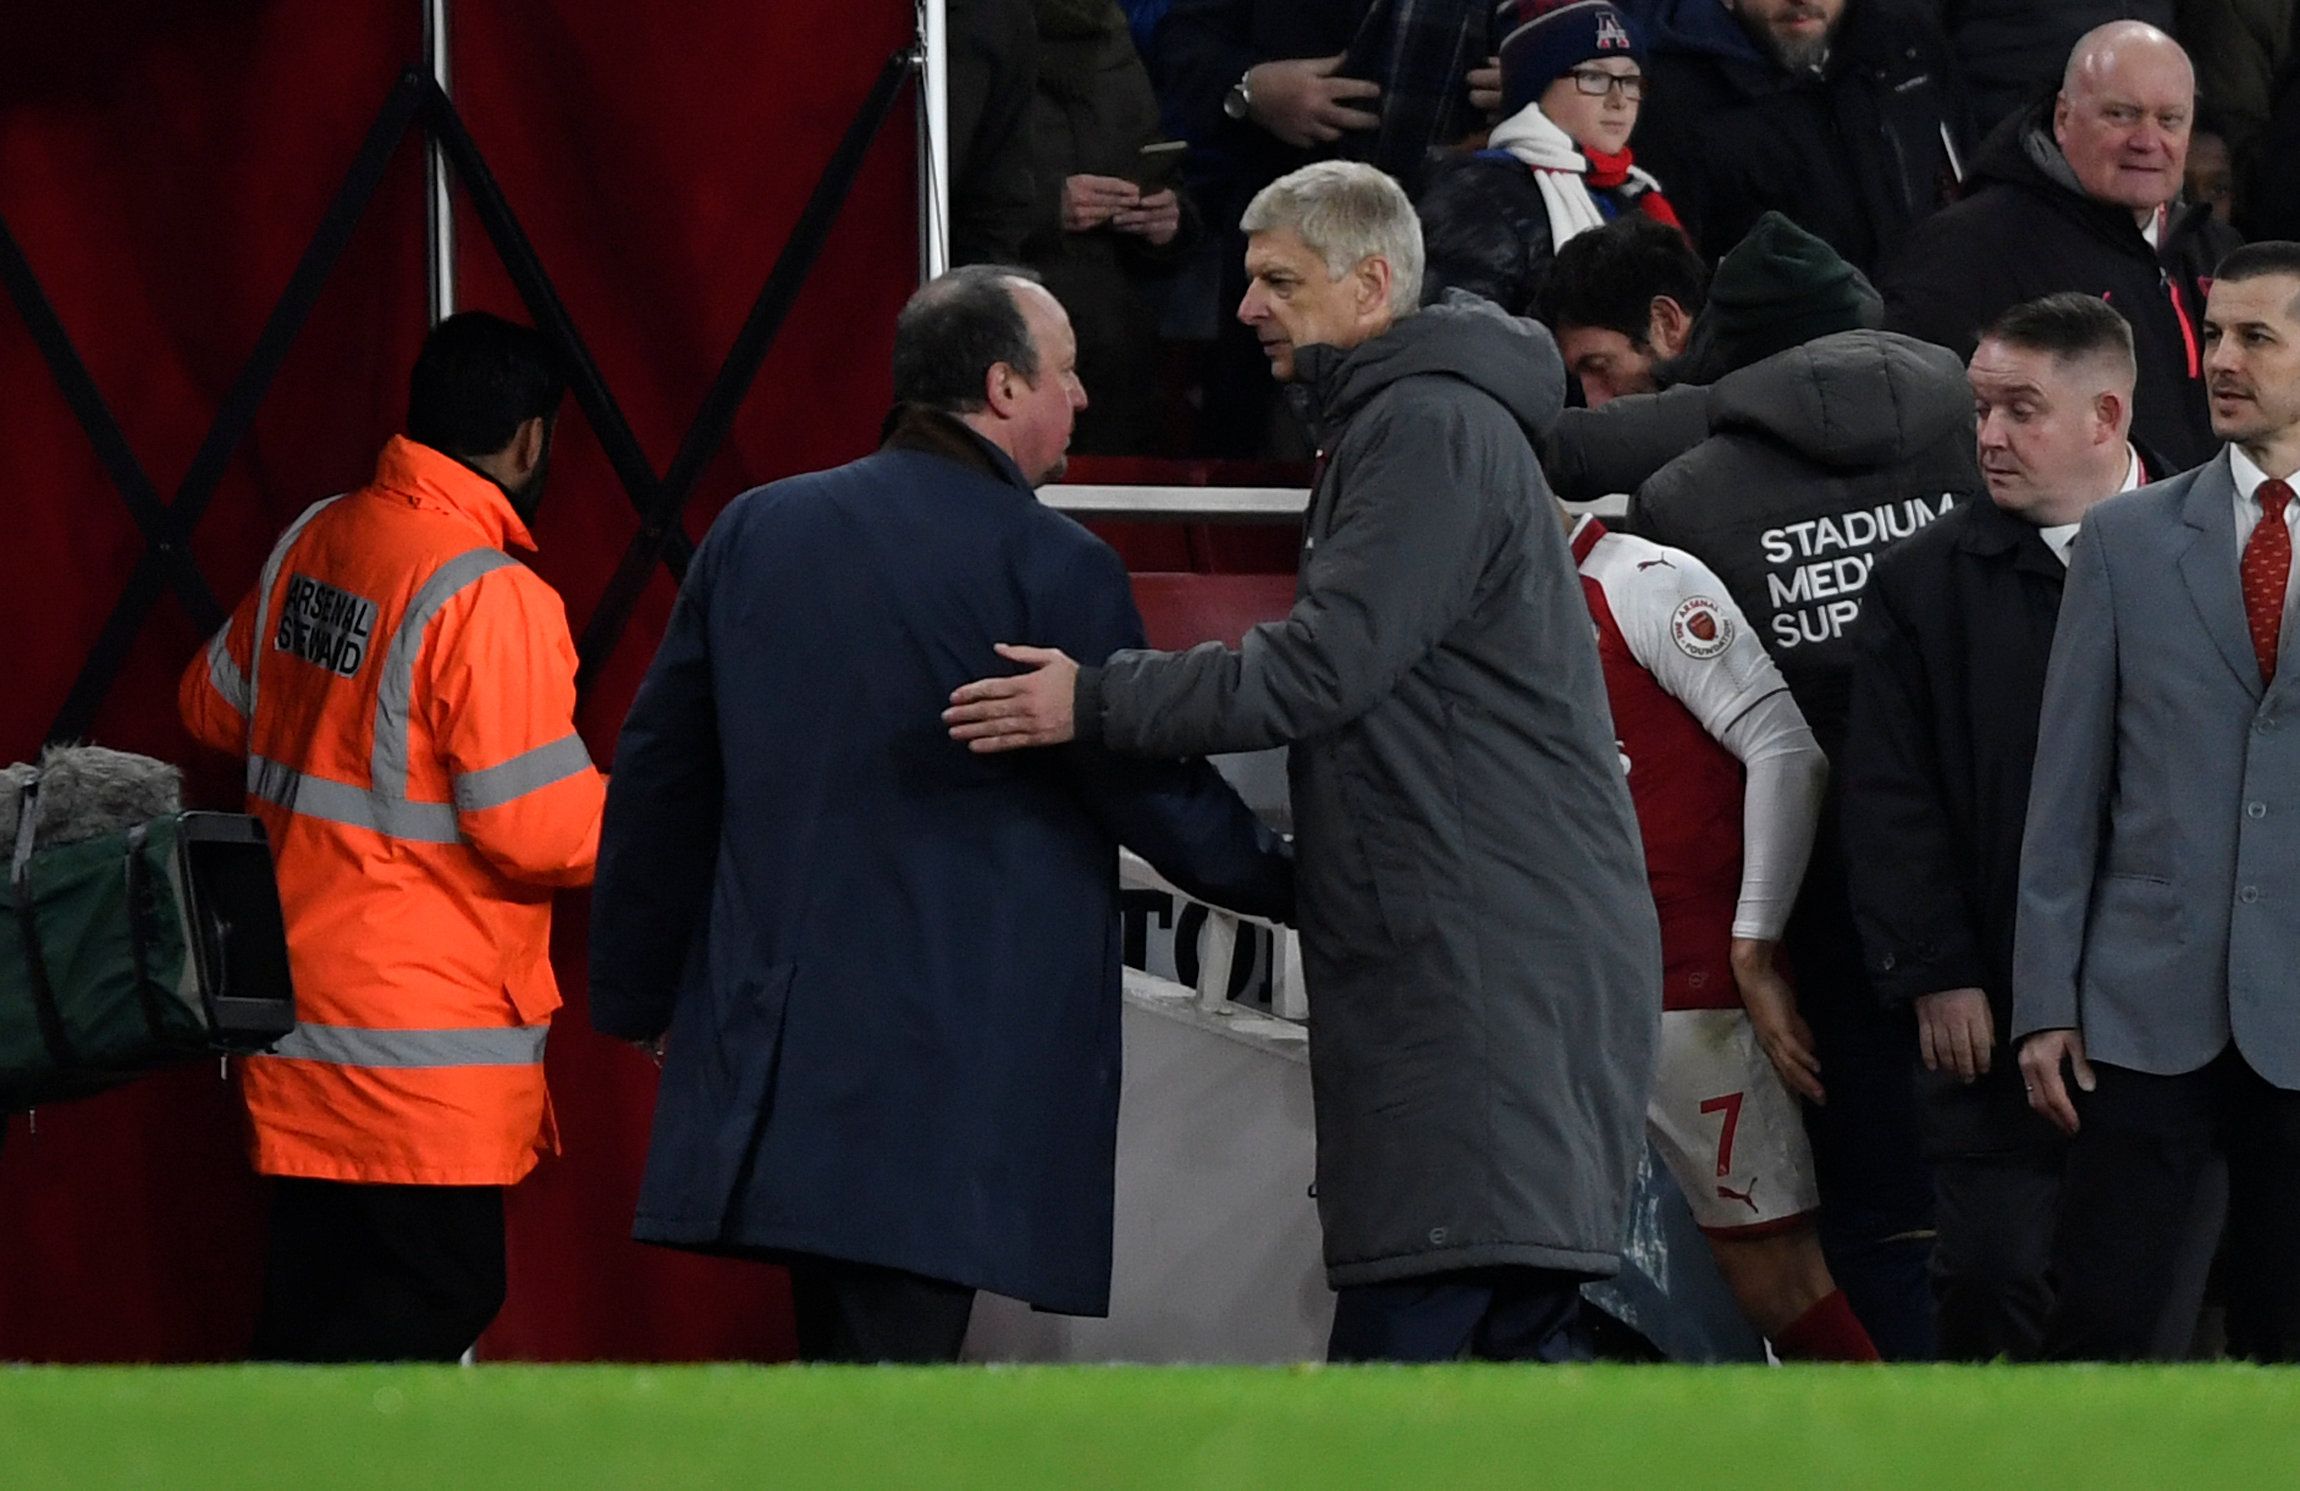 Soccer Football - Premier League - Arsenal vs Newcastle United - Emirates Stadium, London, Britain - December 16, 2017   Newcastle United manager Rafael Benitez and Arsenal manager Arsene Wenger after the match   Action Images via Reuters/Tony O'Brien    EDITORIAL USE ONLY. No use with unauthorized audio, video, data, fixture lists, club/league logos or 